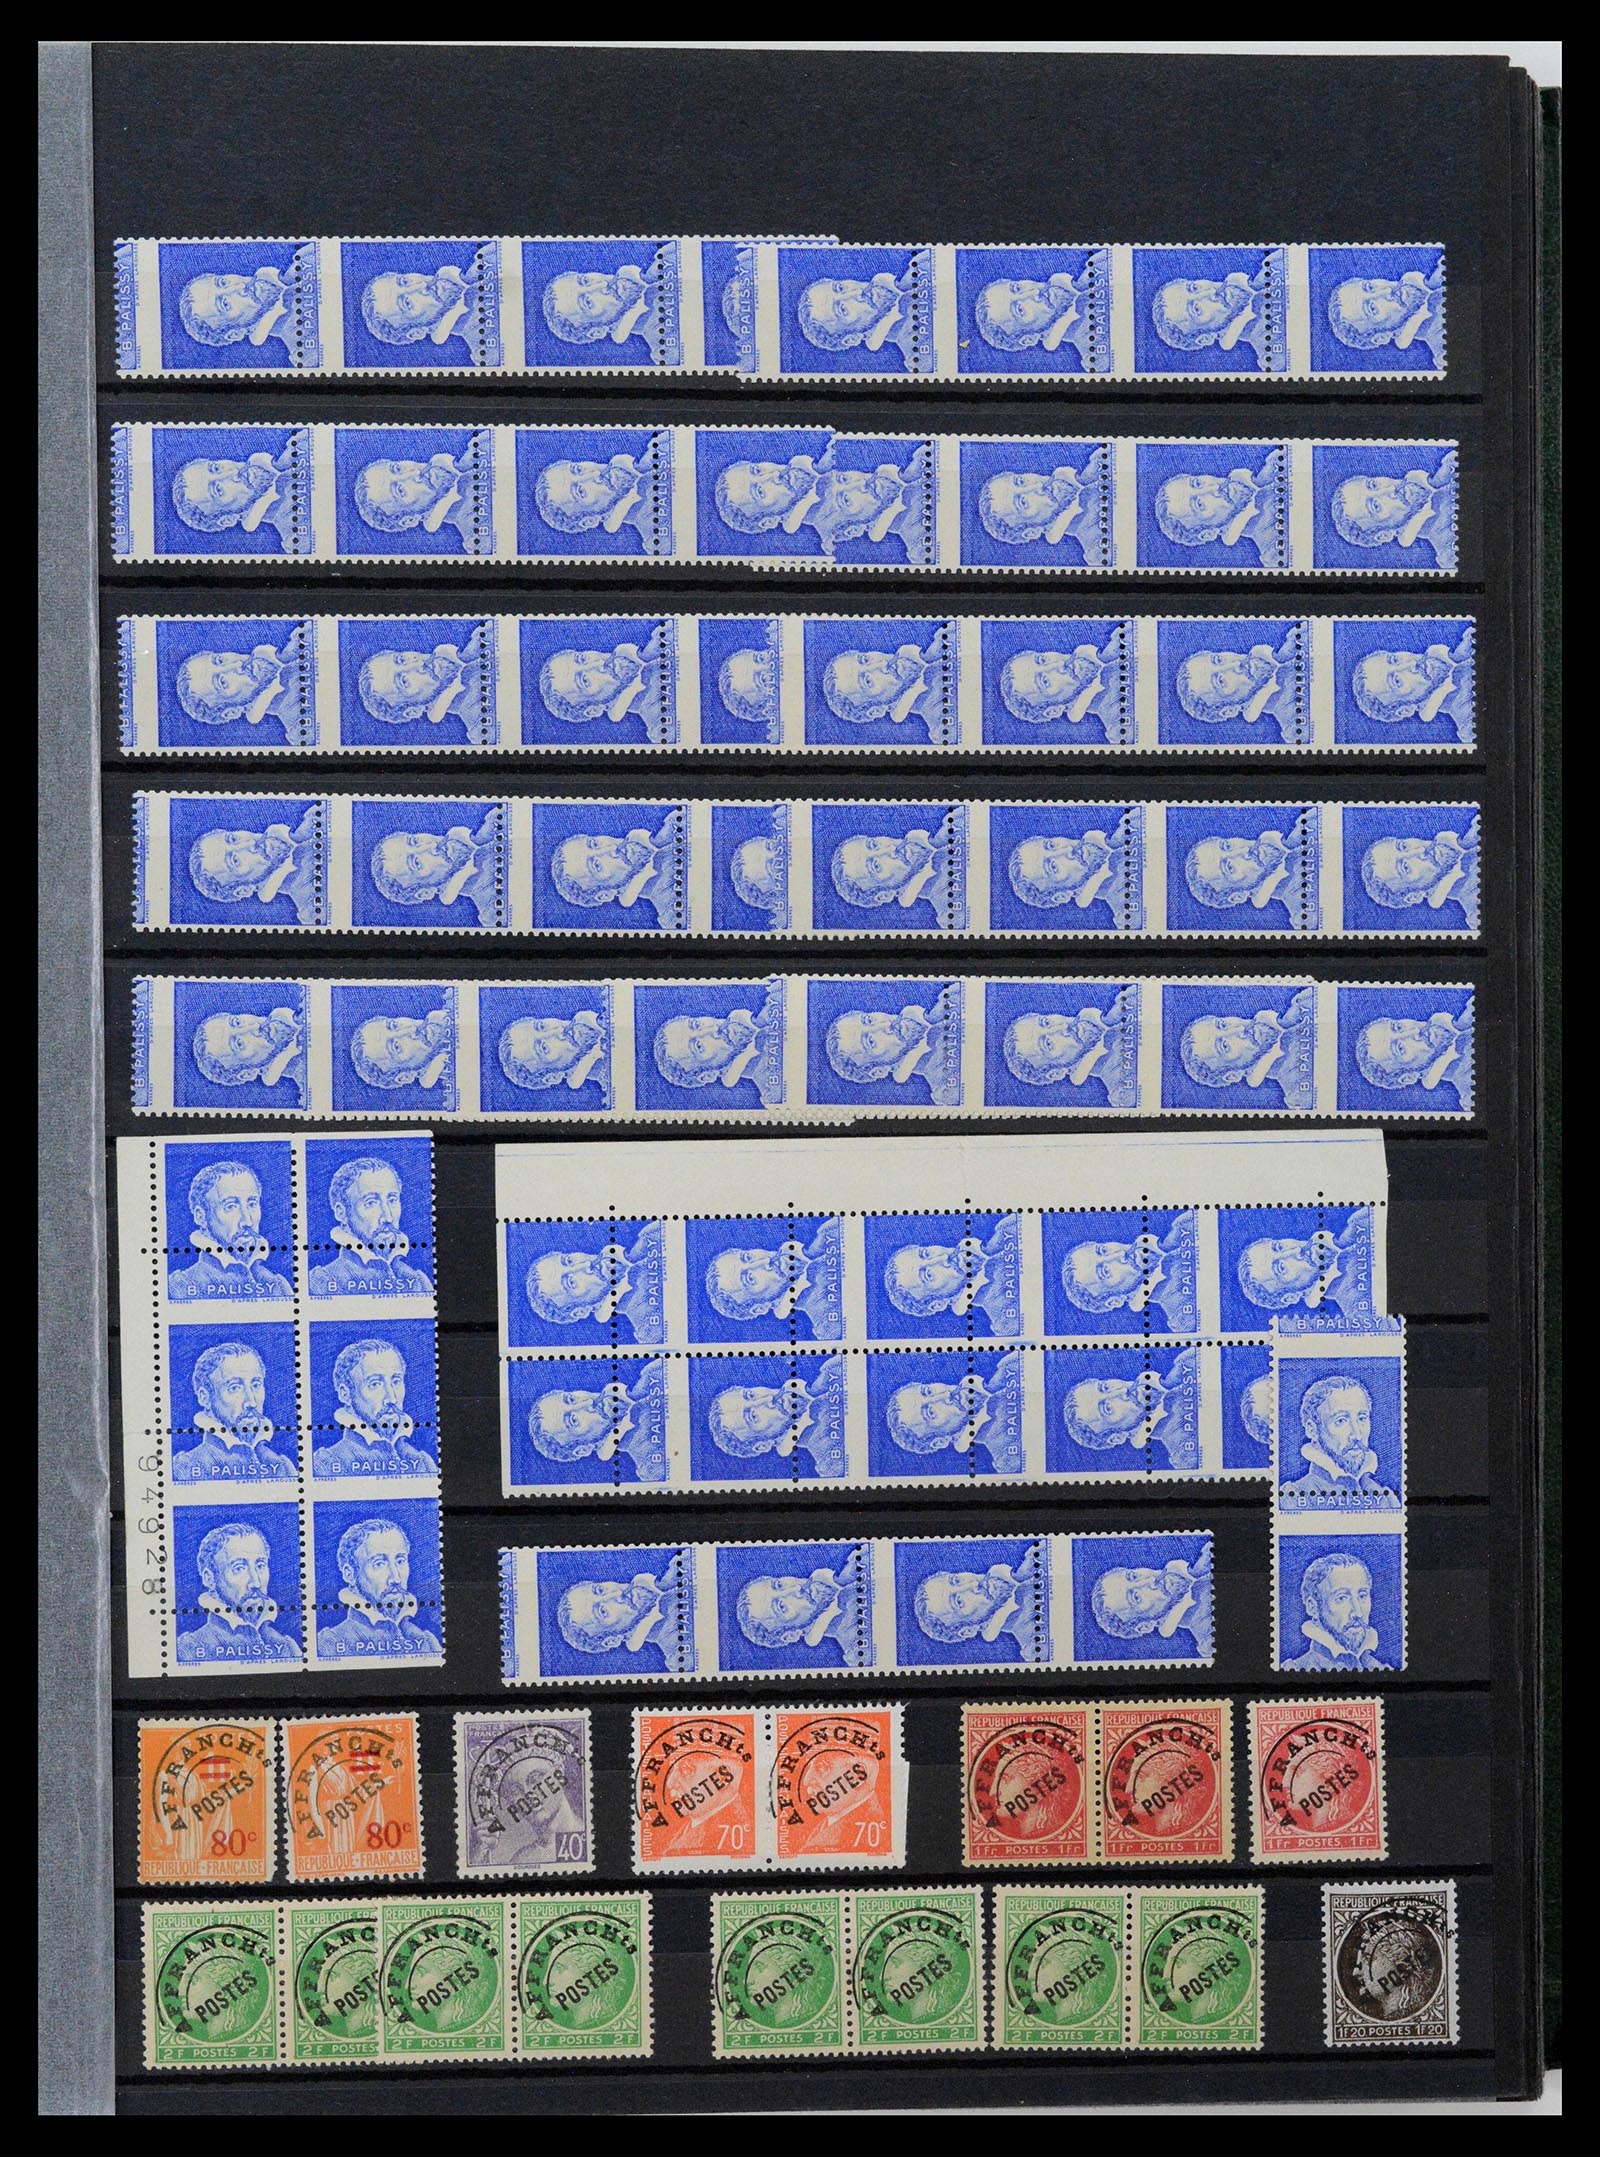 39423 0033 - Stamp collection 39423 France varieties 1862-1985.